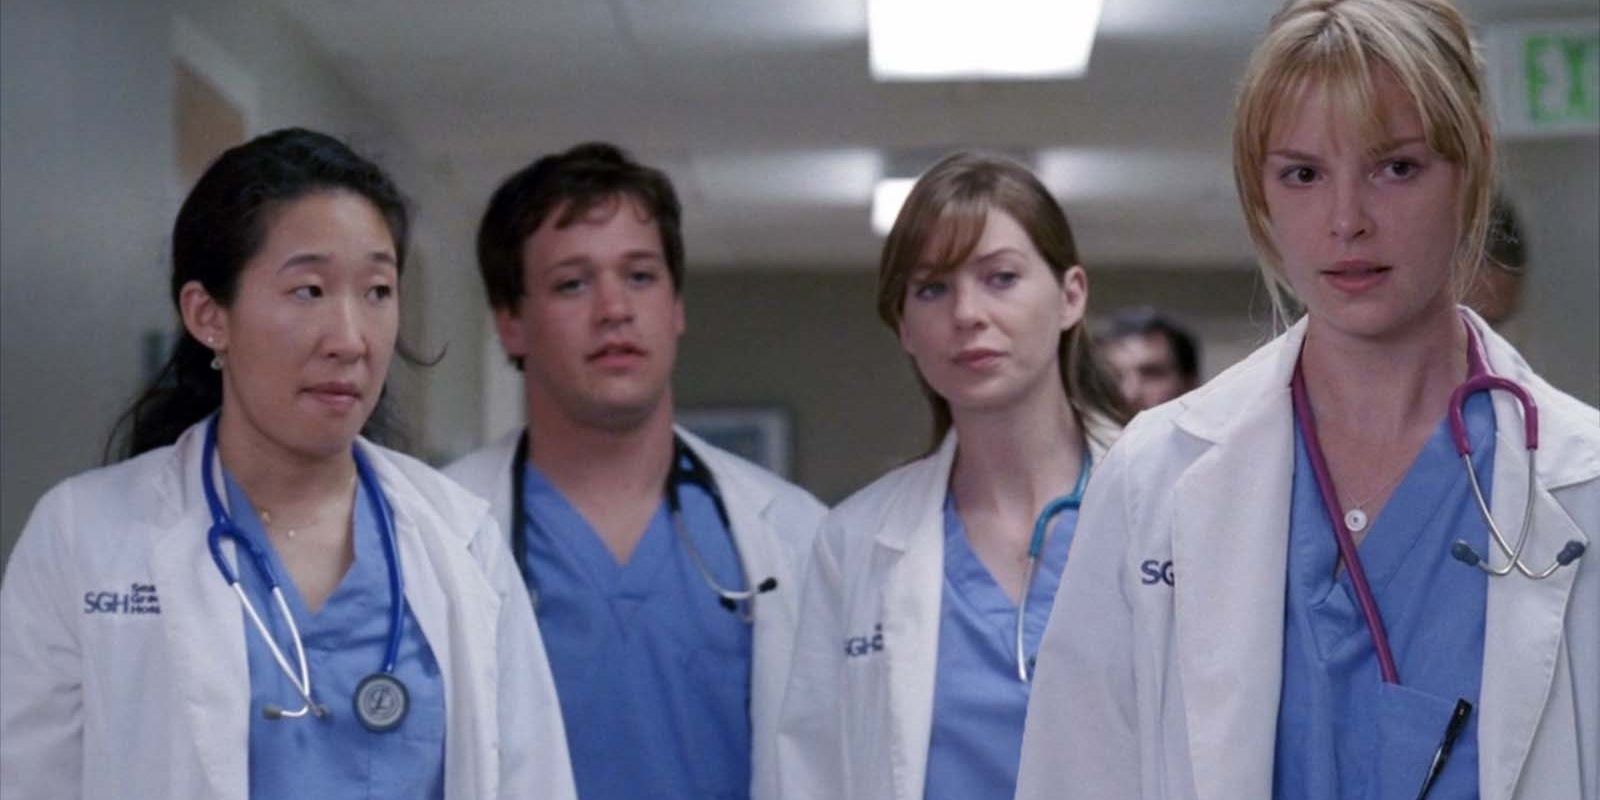 Sandra Oh as Cristina Yang, TR Knight as George O'Malley, Ellen Pompeo as Meredith Grey, and Katherine Heigl as Izzie Stevens in Grey's Anatomy S01E01